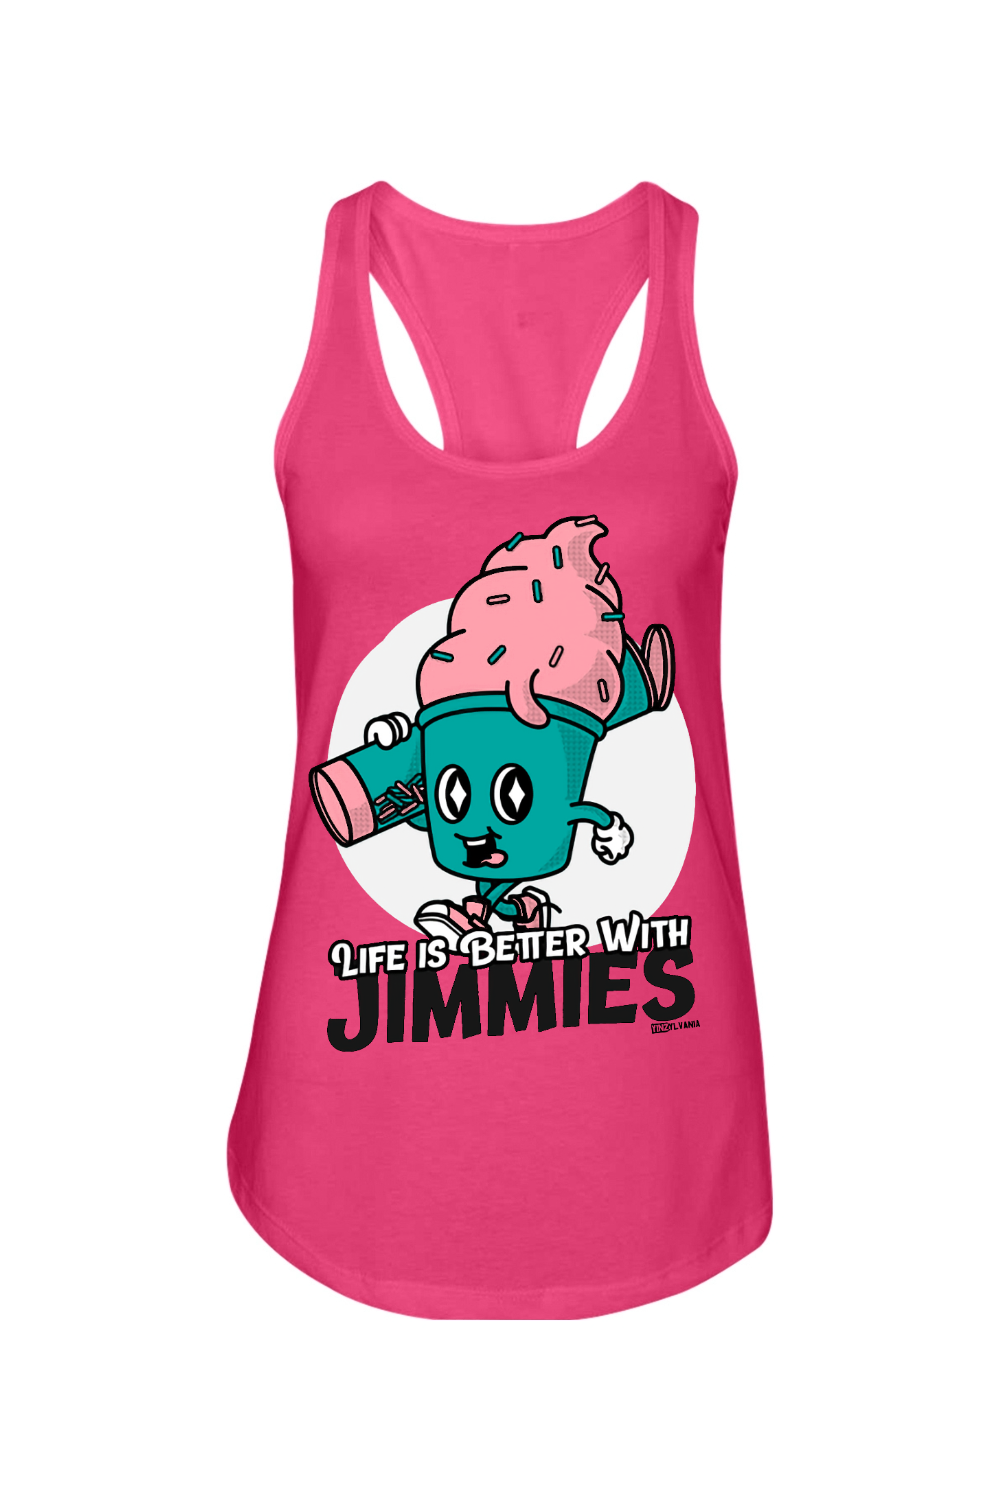 Life is Better with Jimmies - Ladies Racerback Tank - Yinzylvania